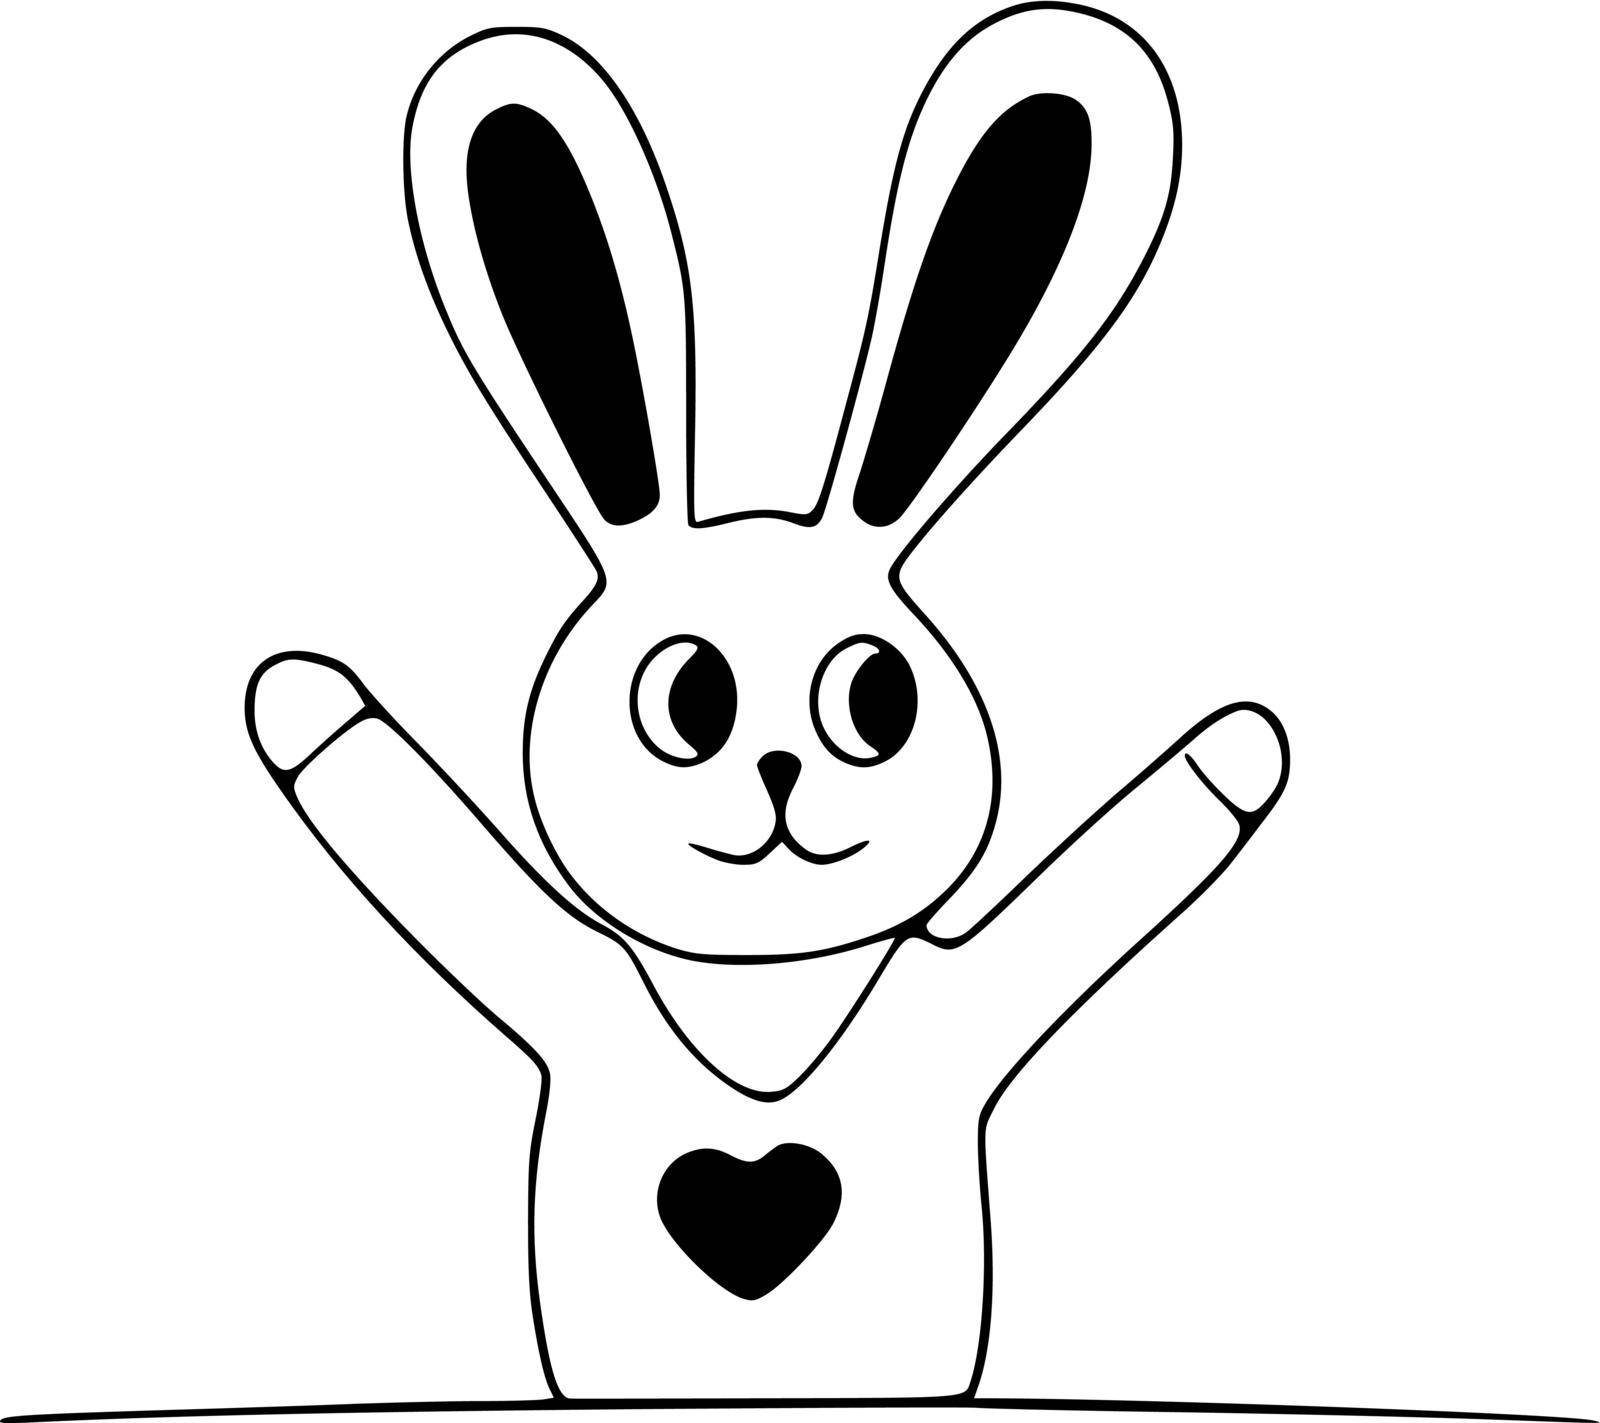 Happy cute rabbit doodle icon. Cute pets vector art on white background.